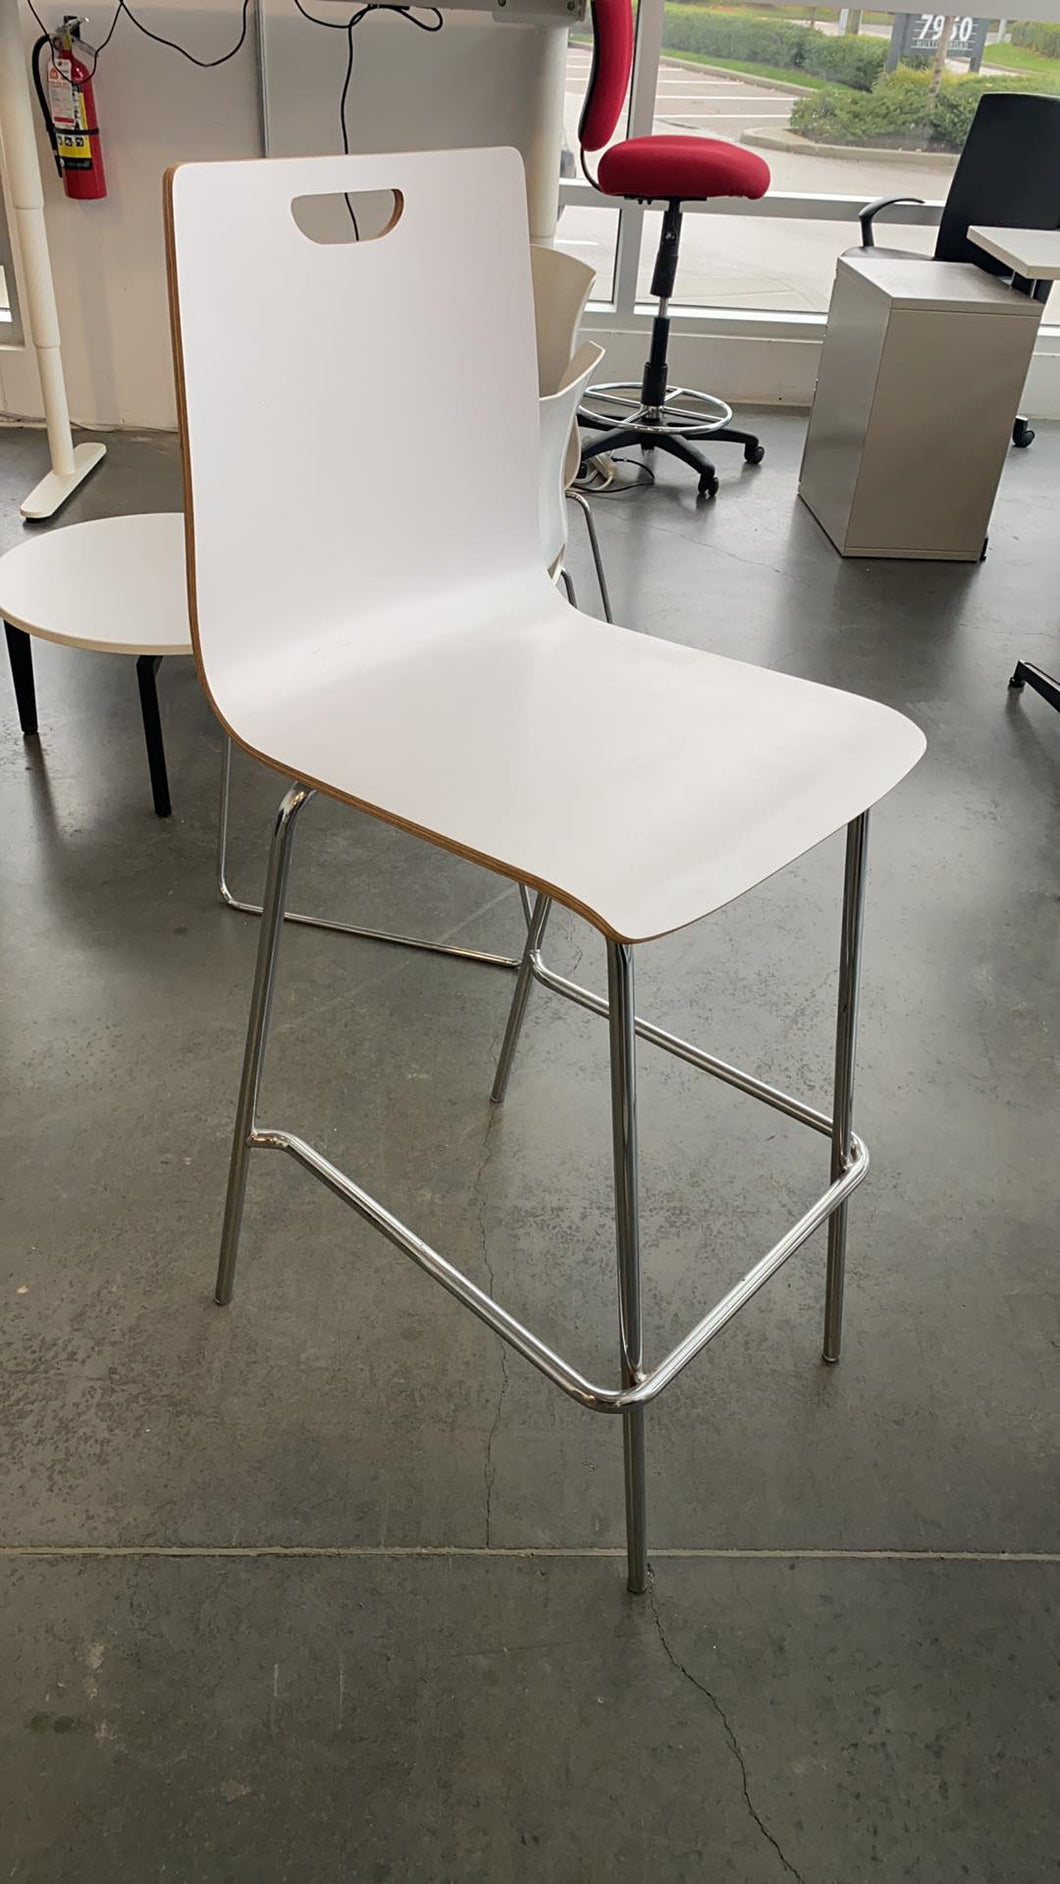 Used White Counter Height Stool Chairs